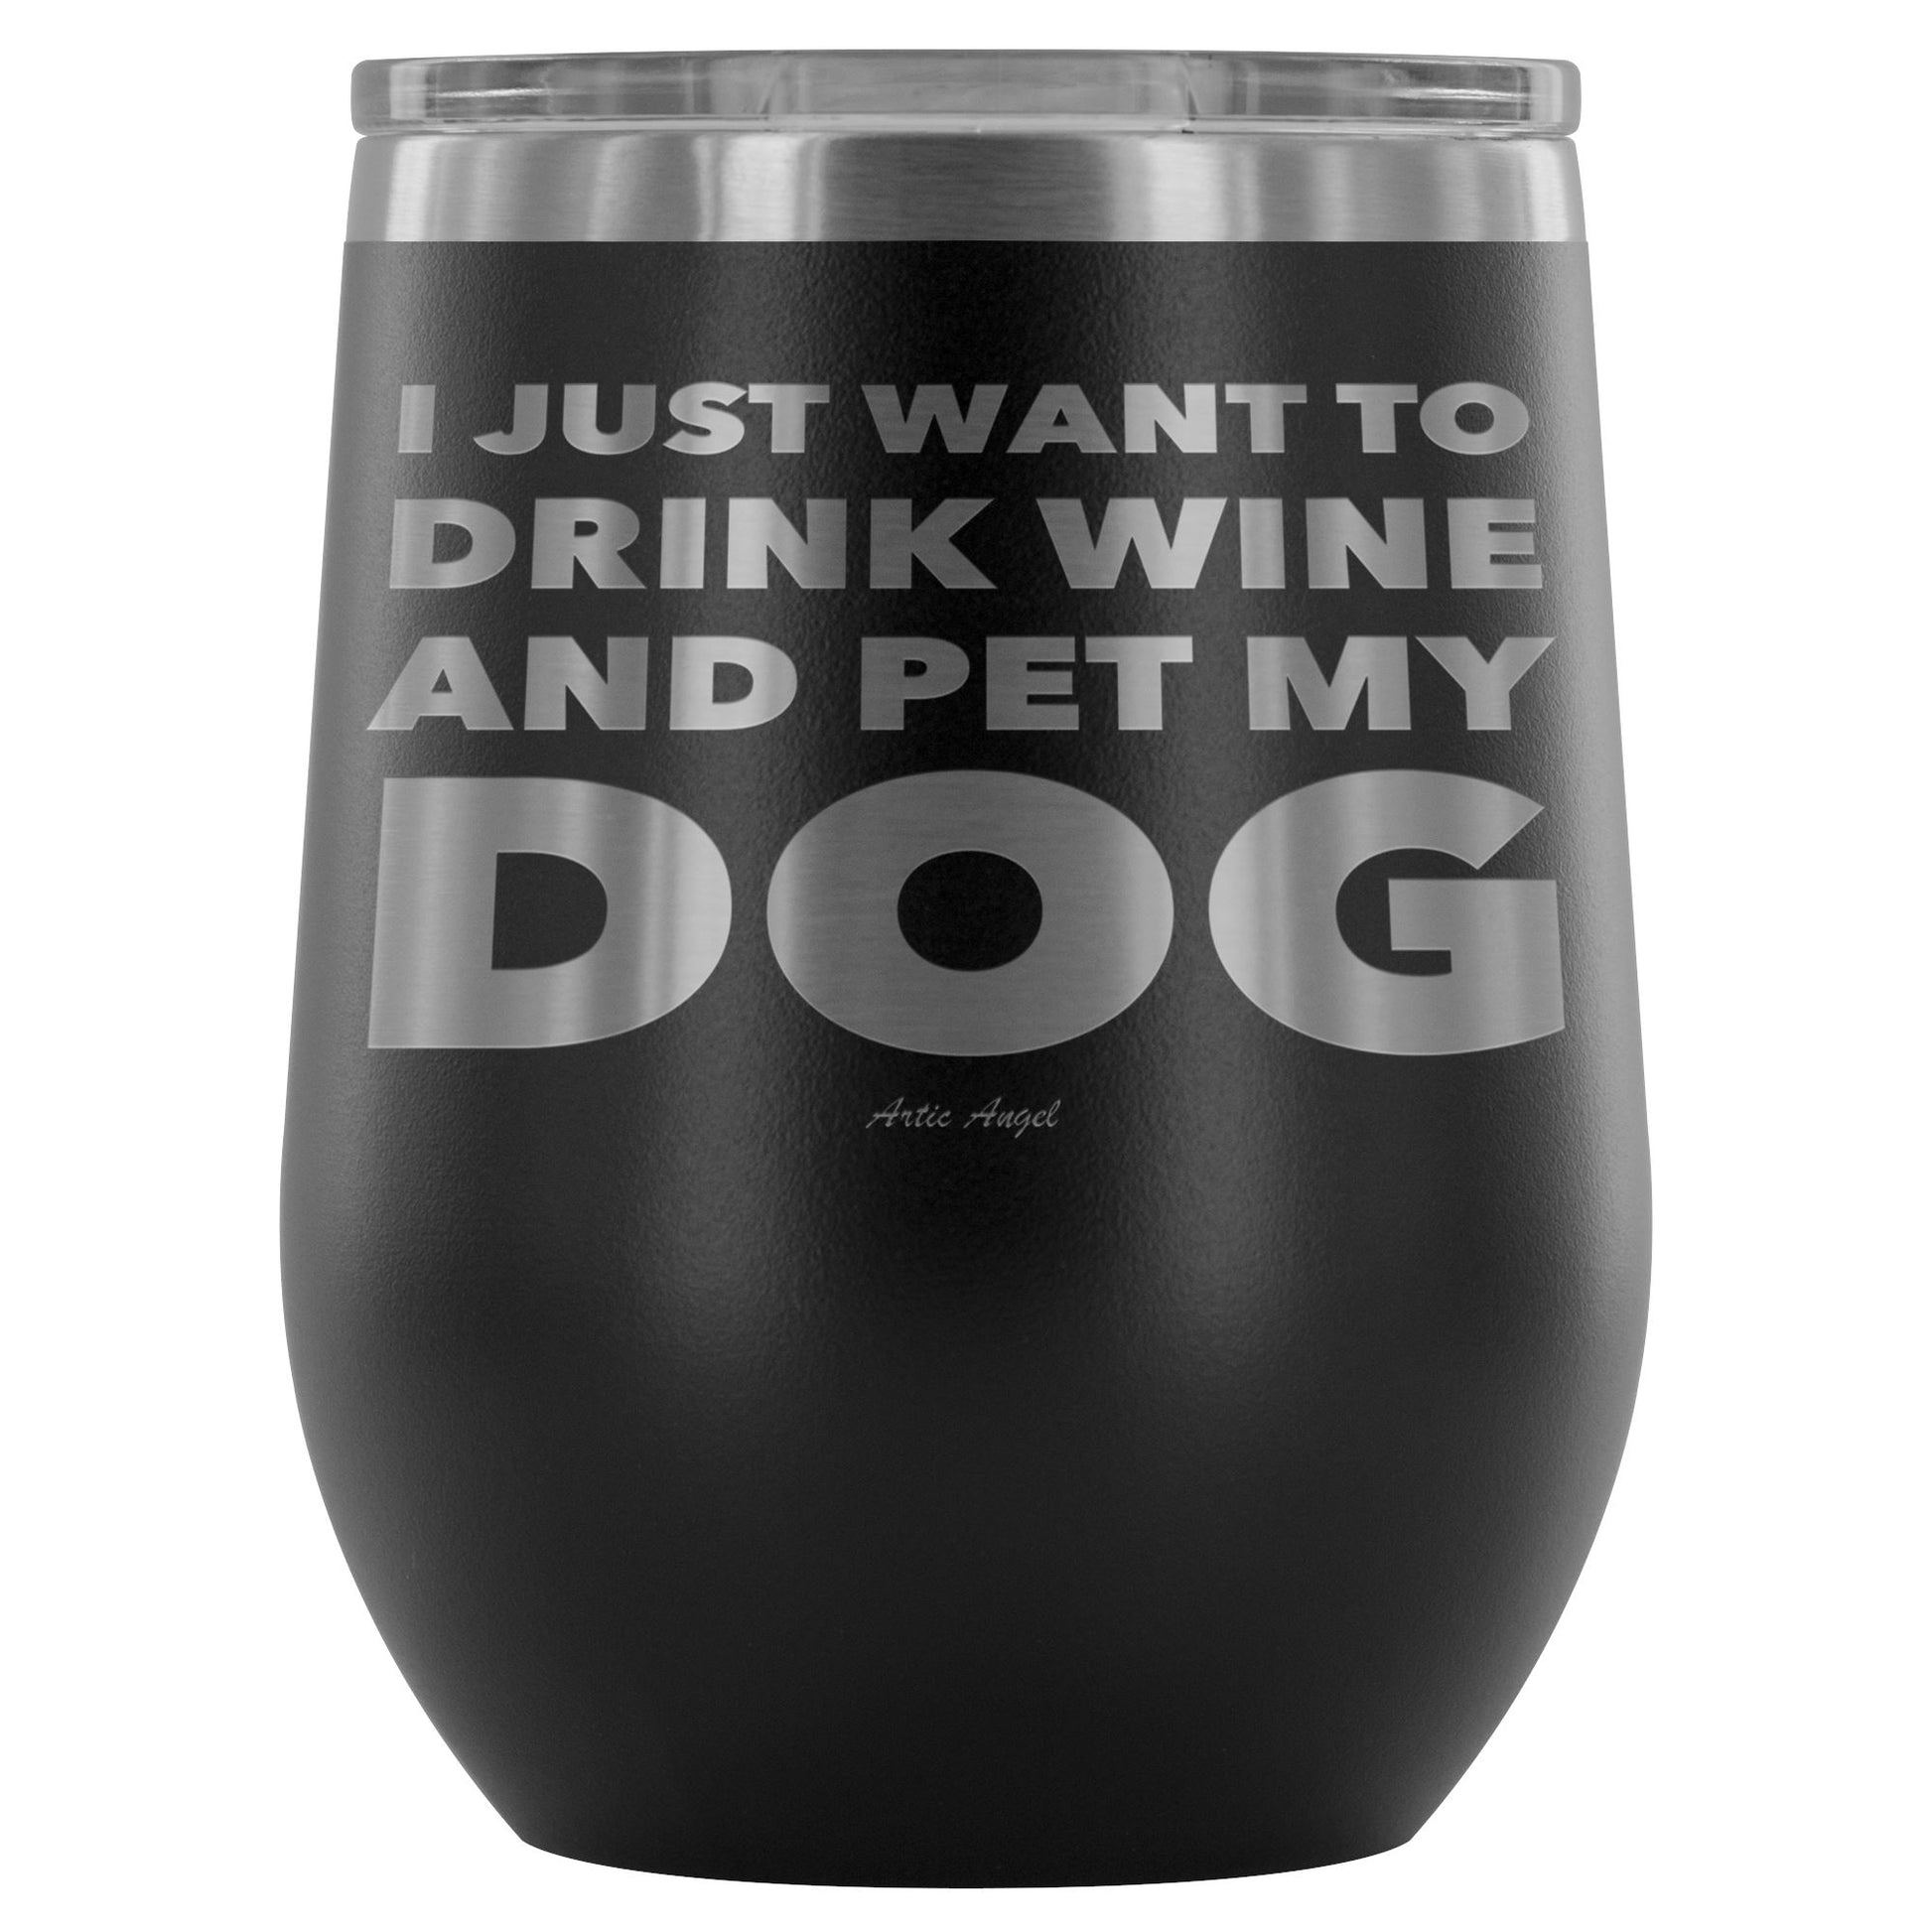 "I Just Want To Drink Wine And Pet My Dog" - Stemless Wine Cup Wine Tumbler Black 